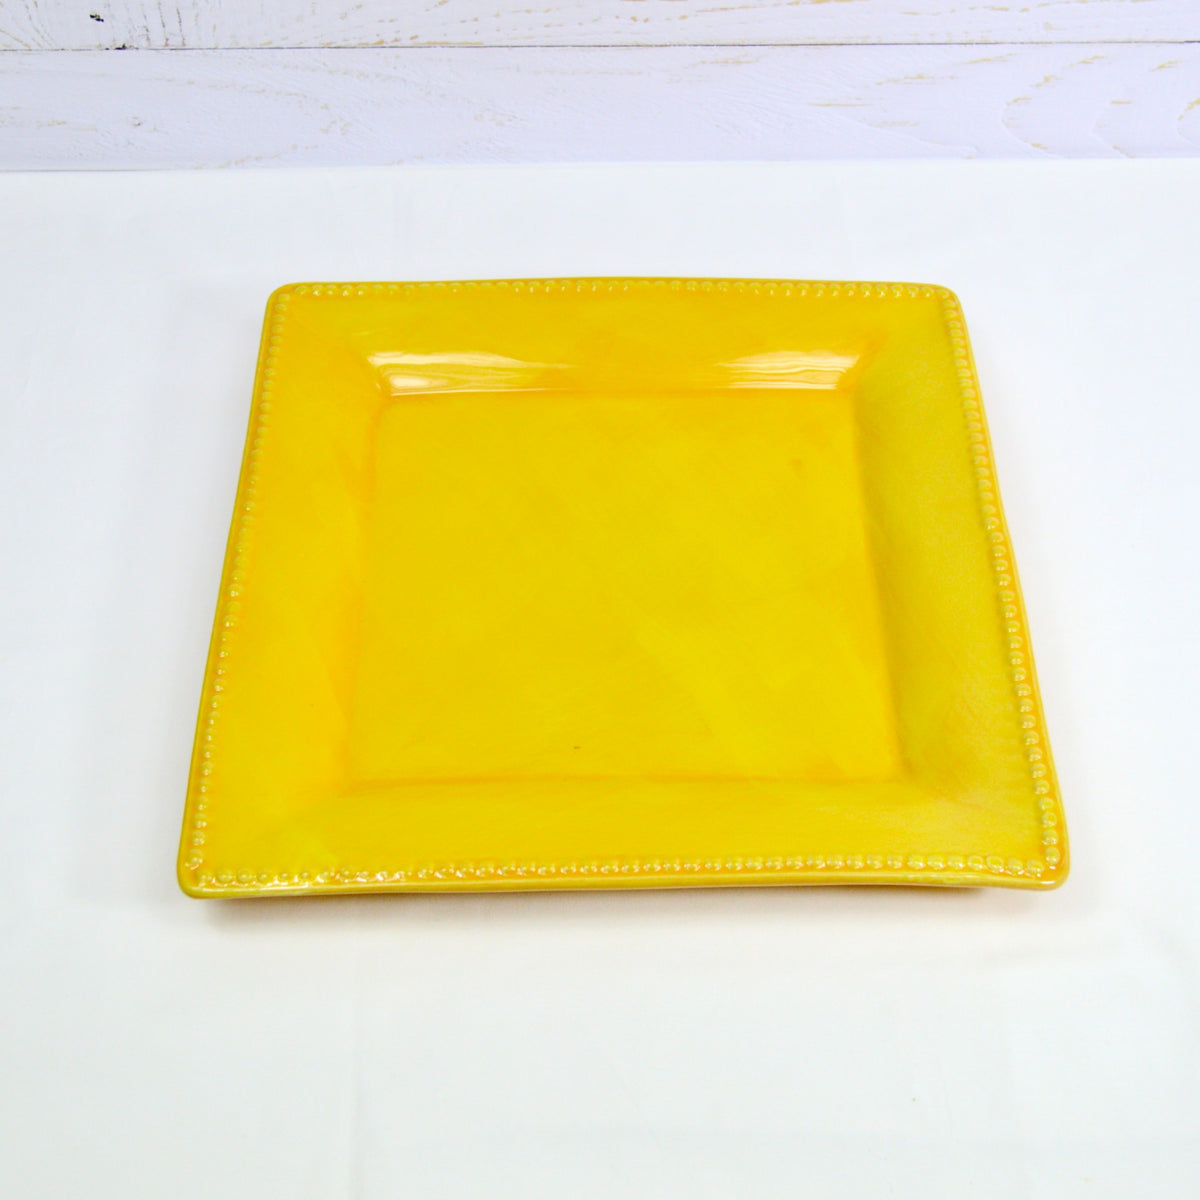 Tuscan Ceramic Large Square Platter, Made in Italy - My Italian Decor